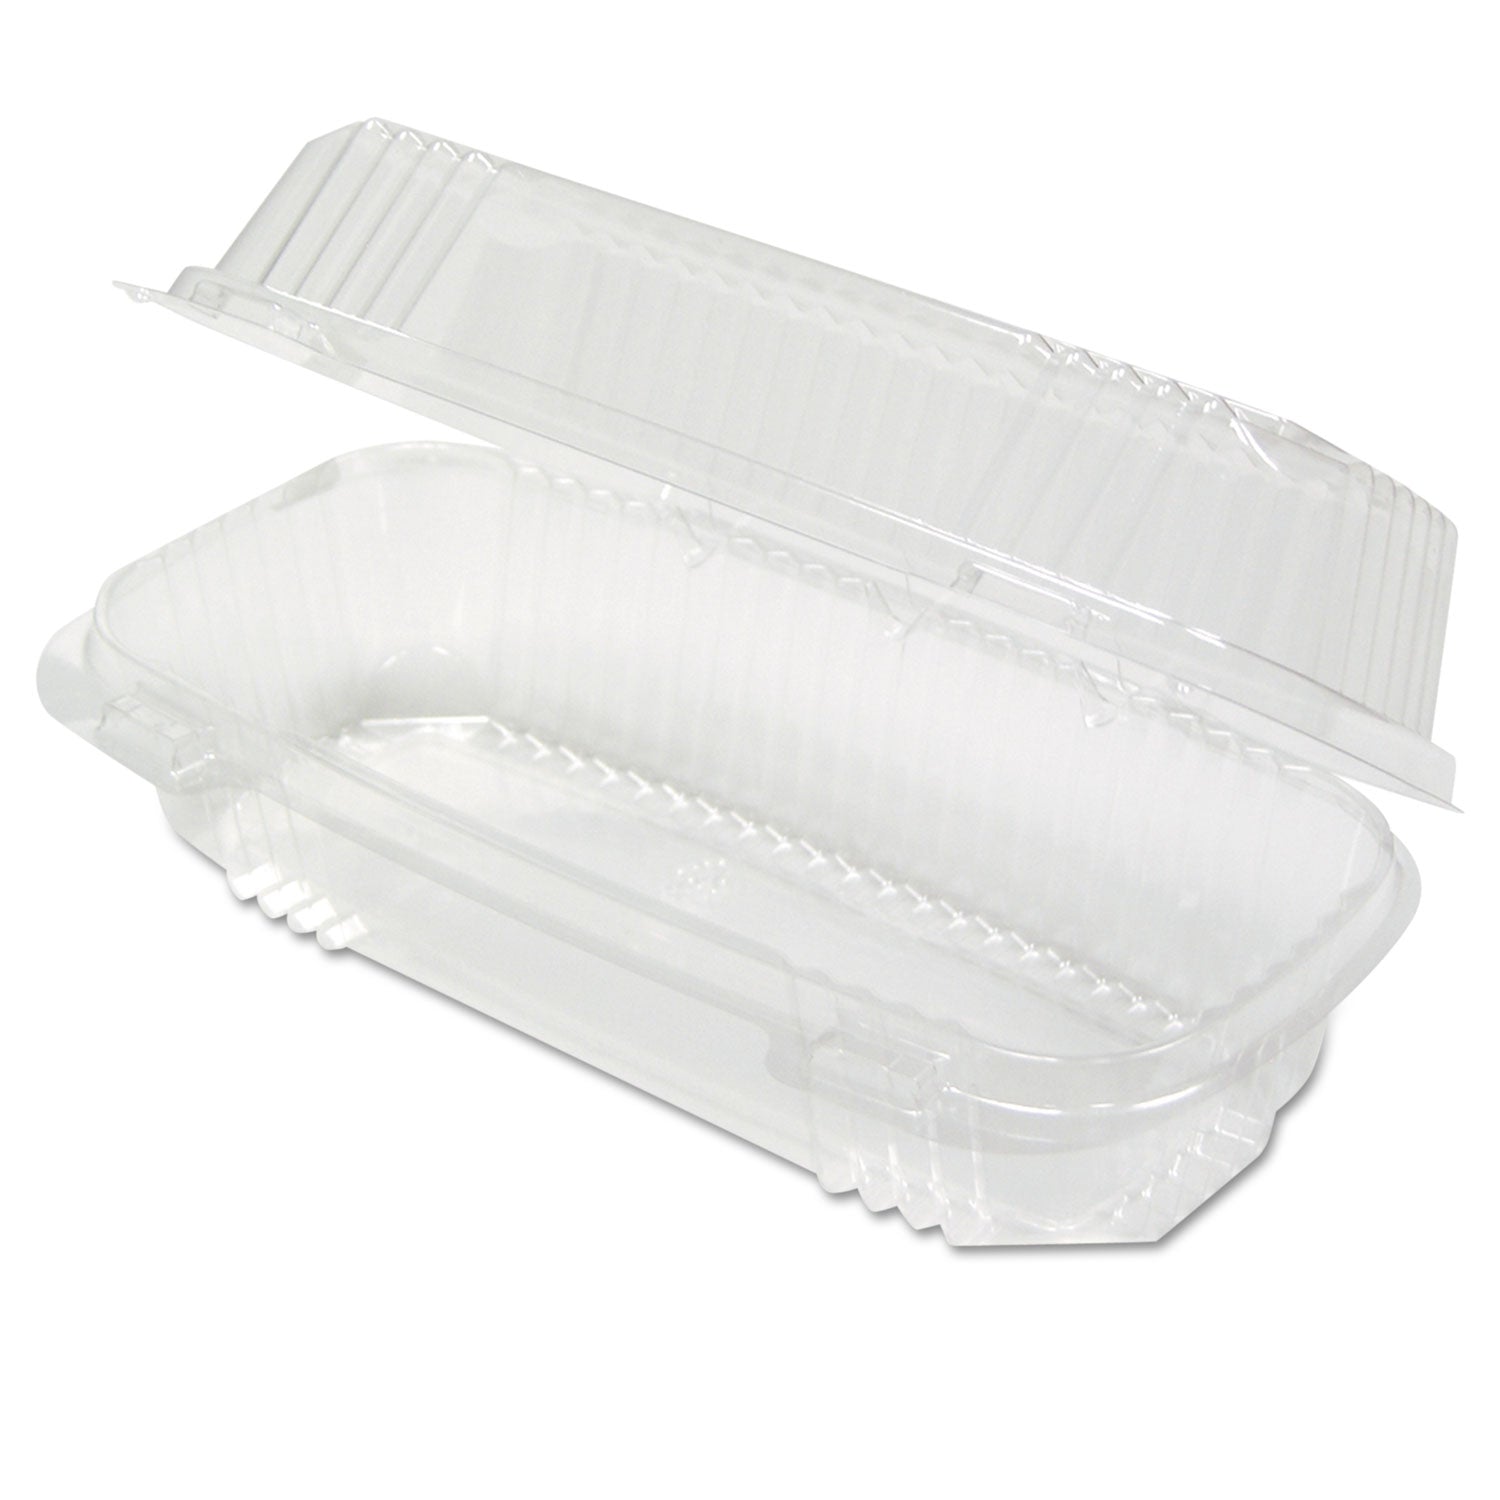 clearview-smartlock-hinged-lid-container-23-oz-85-x-4-x-25-clear-plastic-250-carton_pctyci81048 - 1